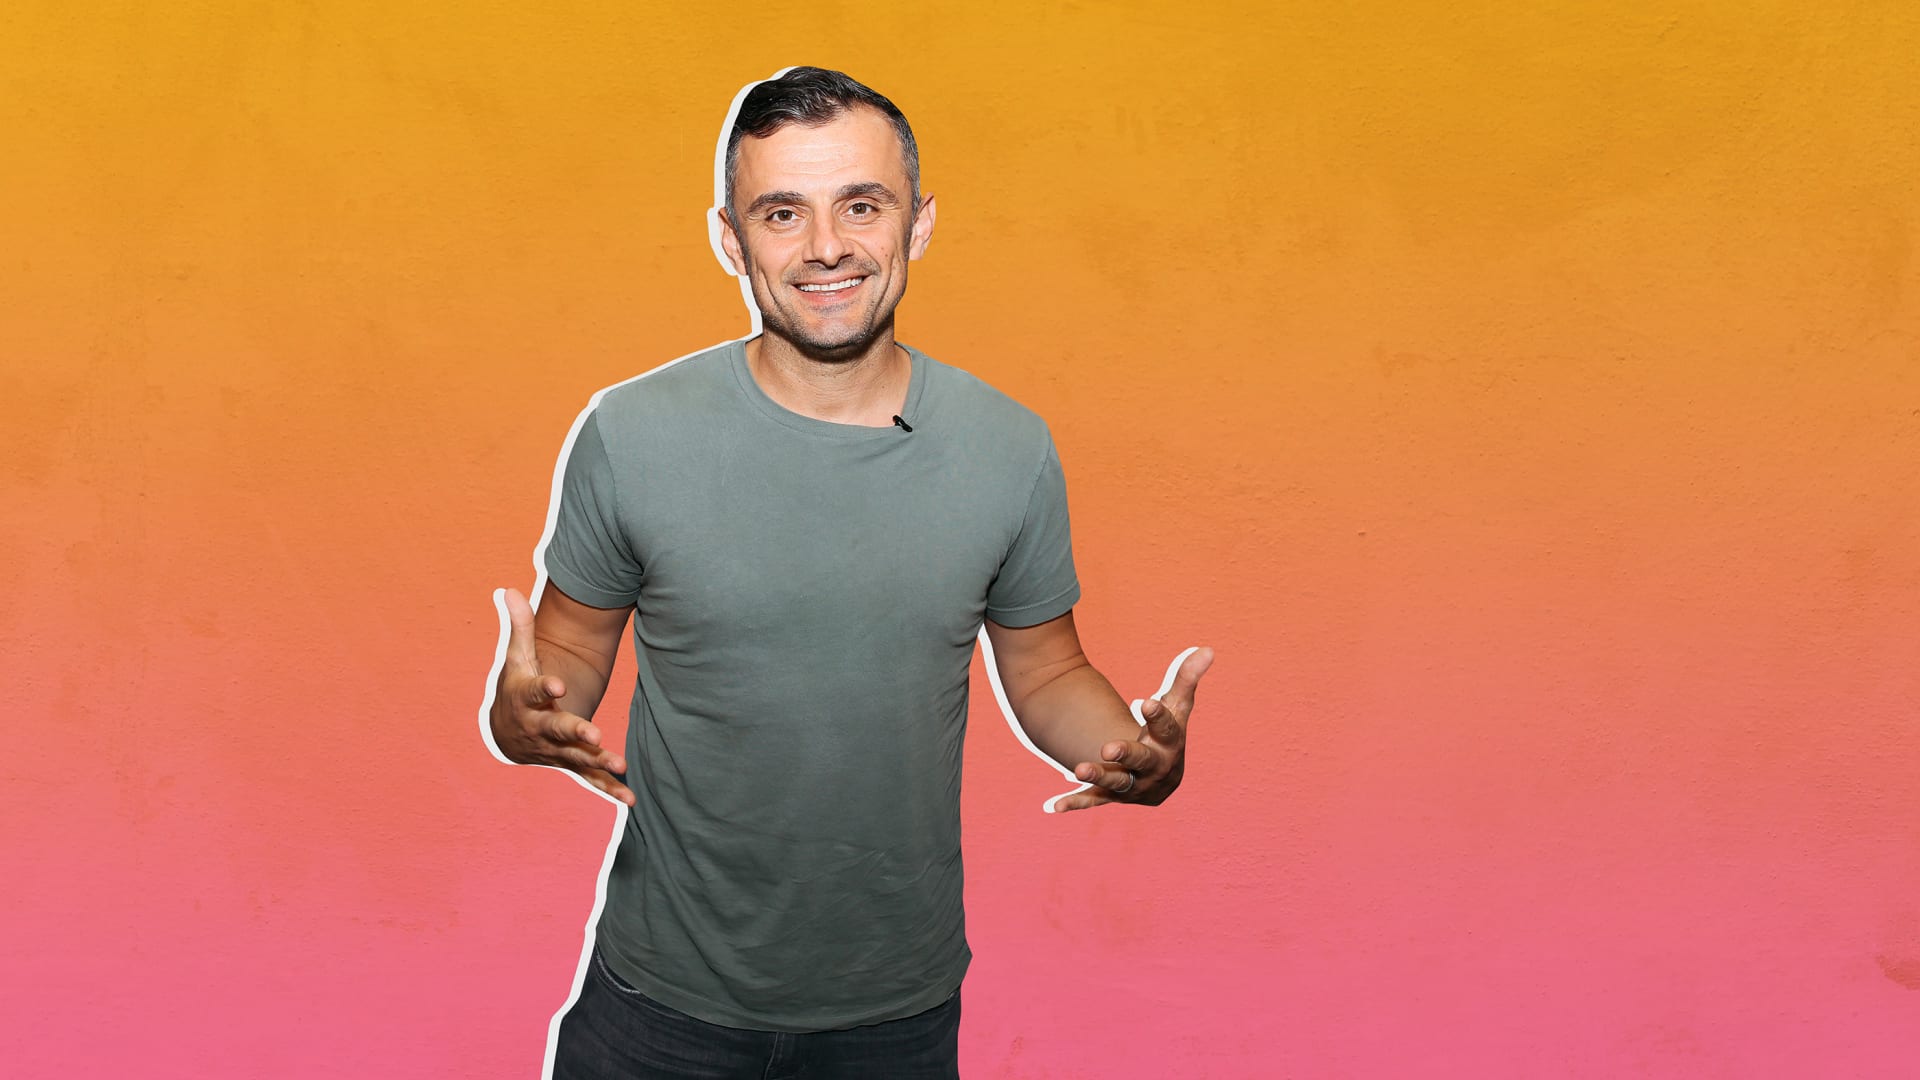 Gary Vaynerchuk Says if Your Employees Aren't Performing Now, You Need to Do 3 Things